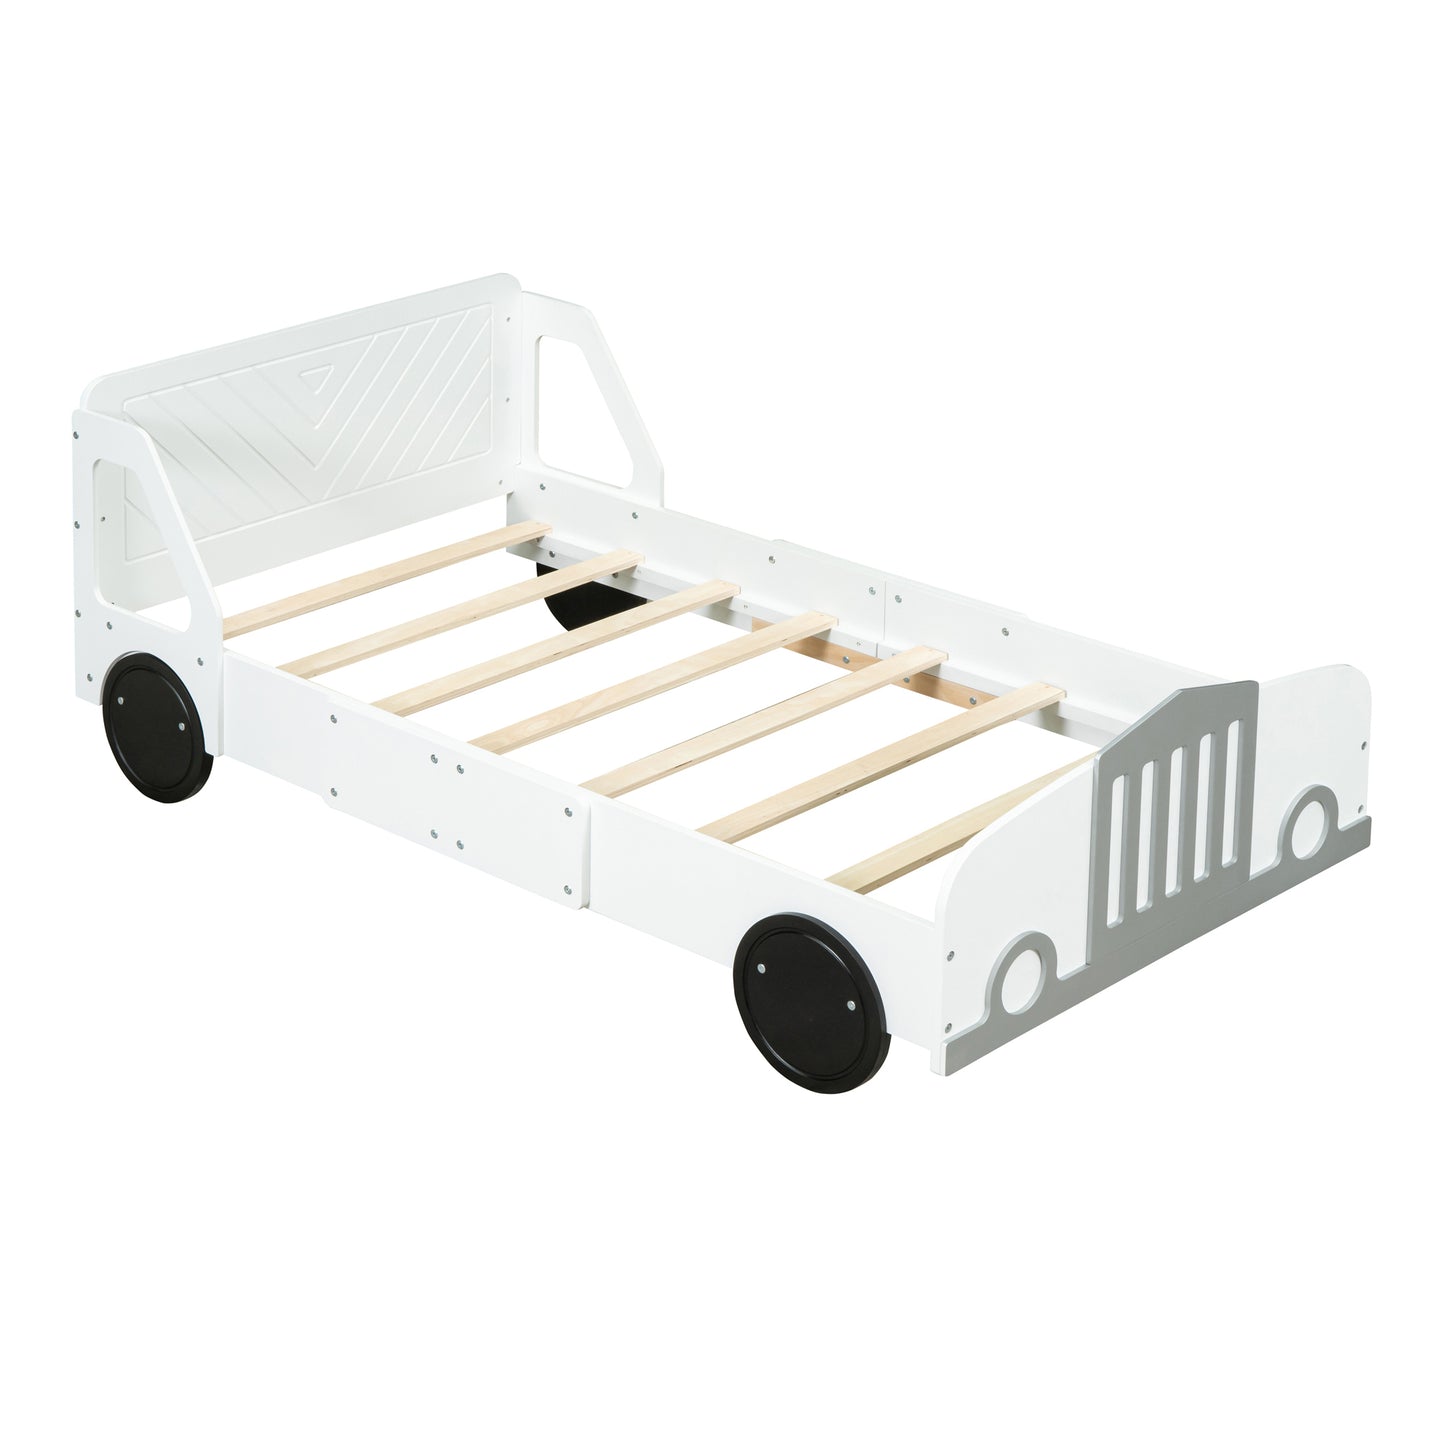 Twin Size Car-Shaped Platform Bed with Wheels,White